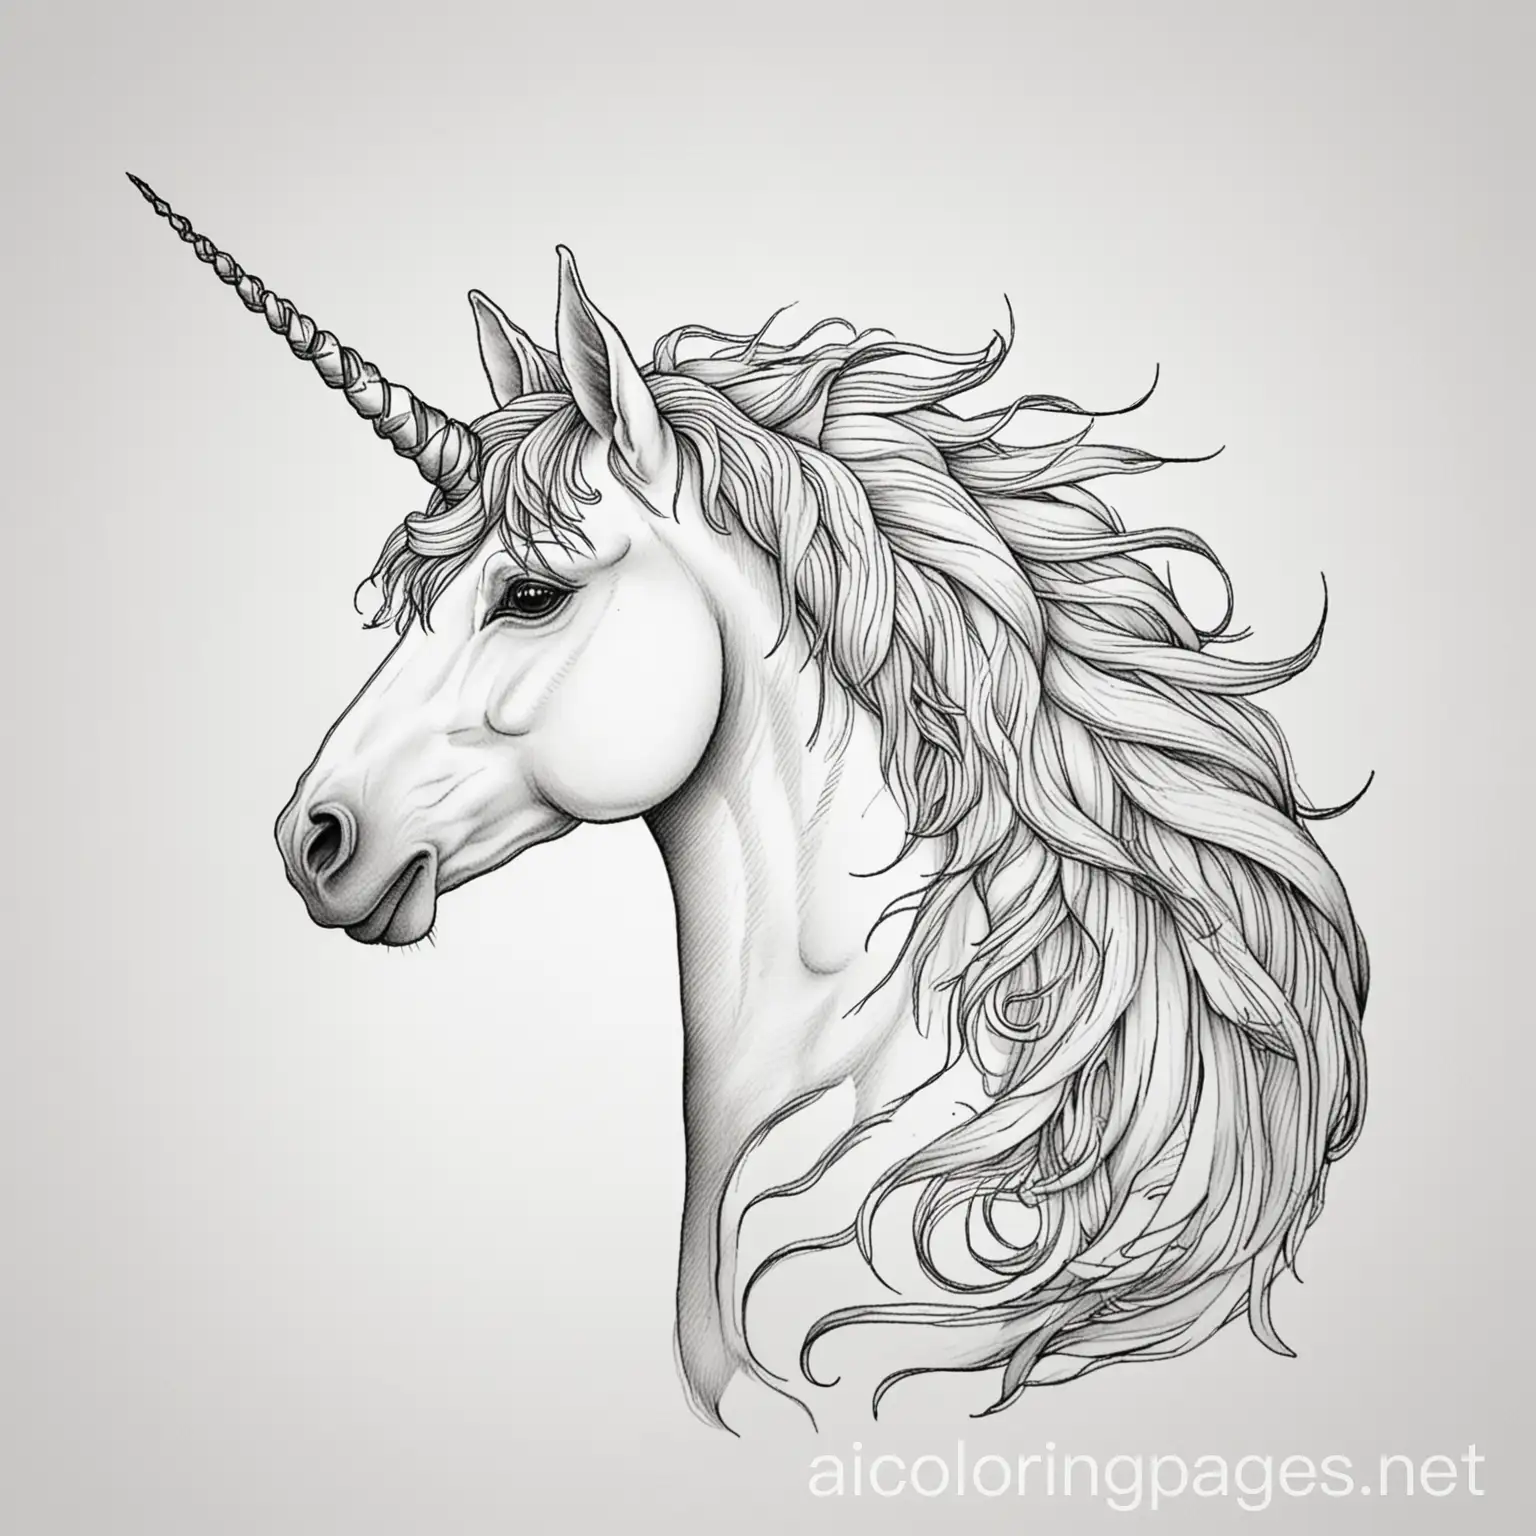 Simple-Unicorn-Coloring-Page-with-Ample-White-Space